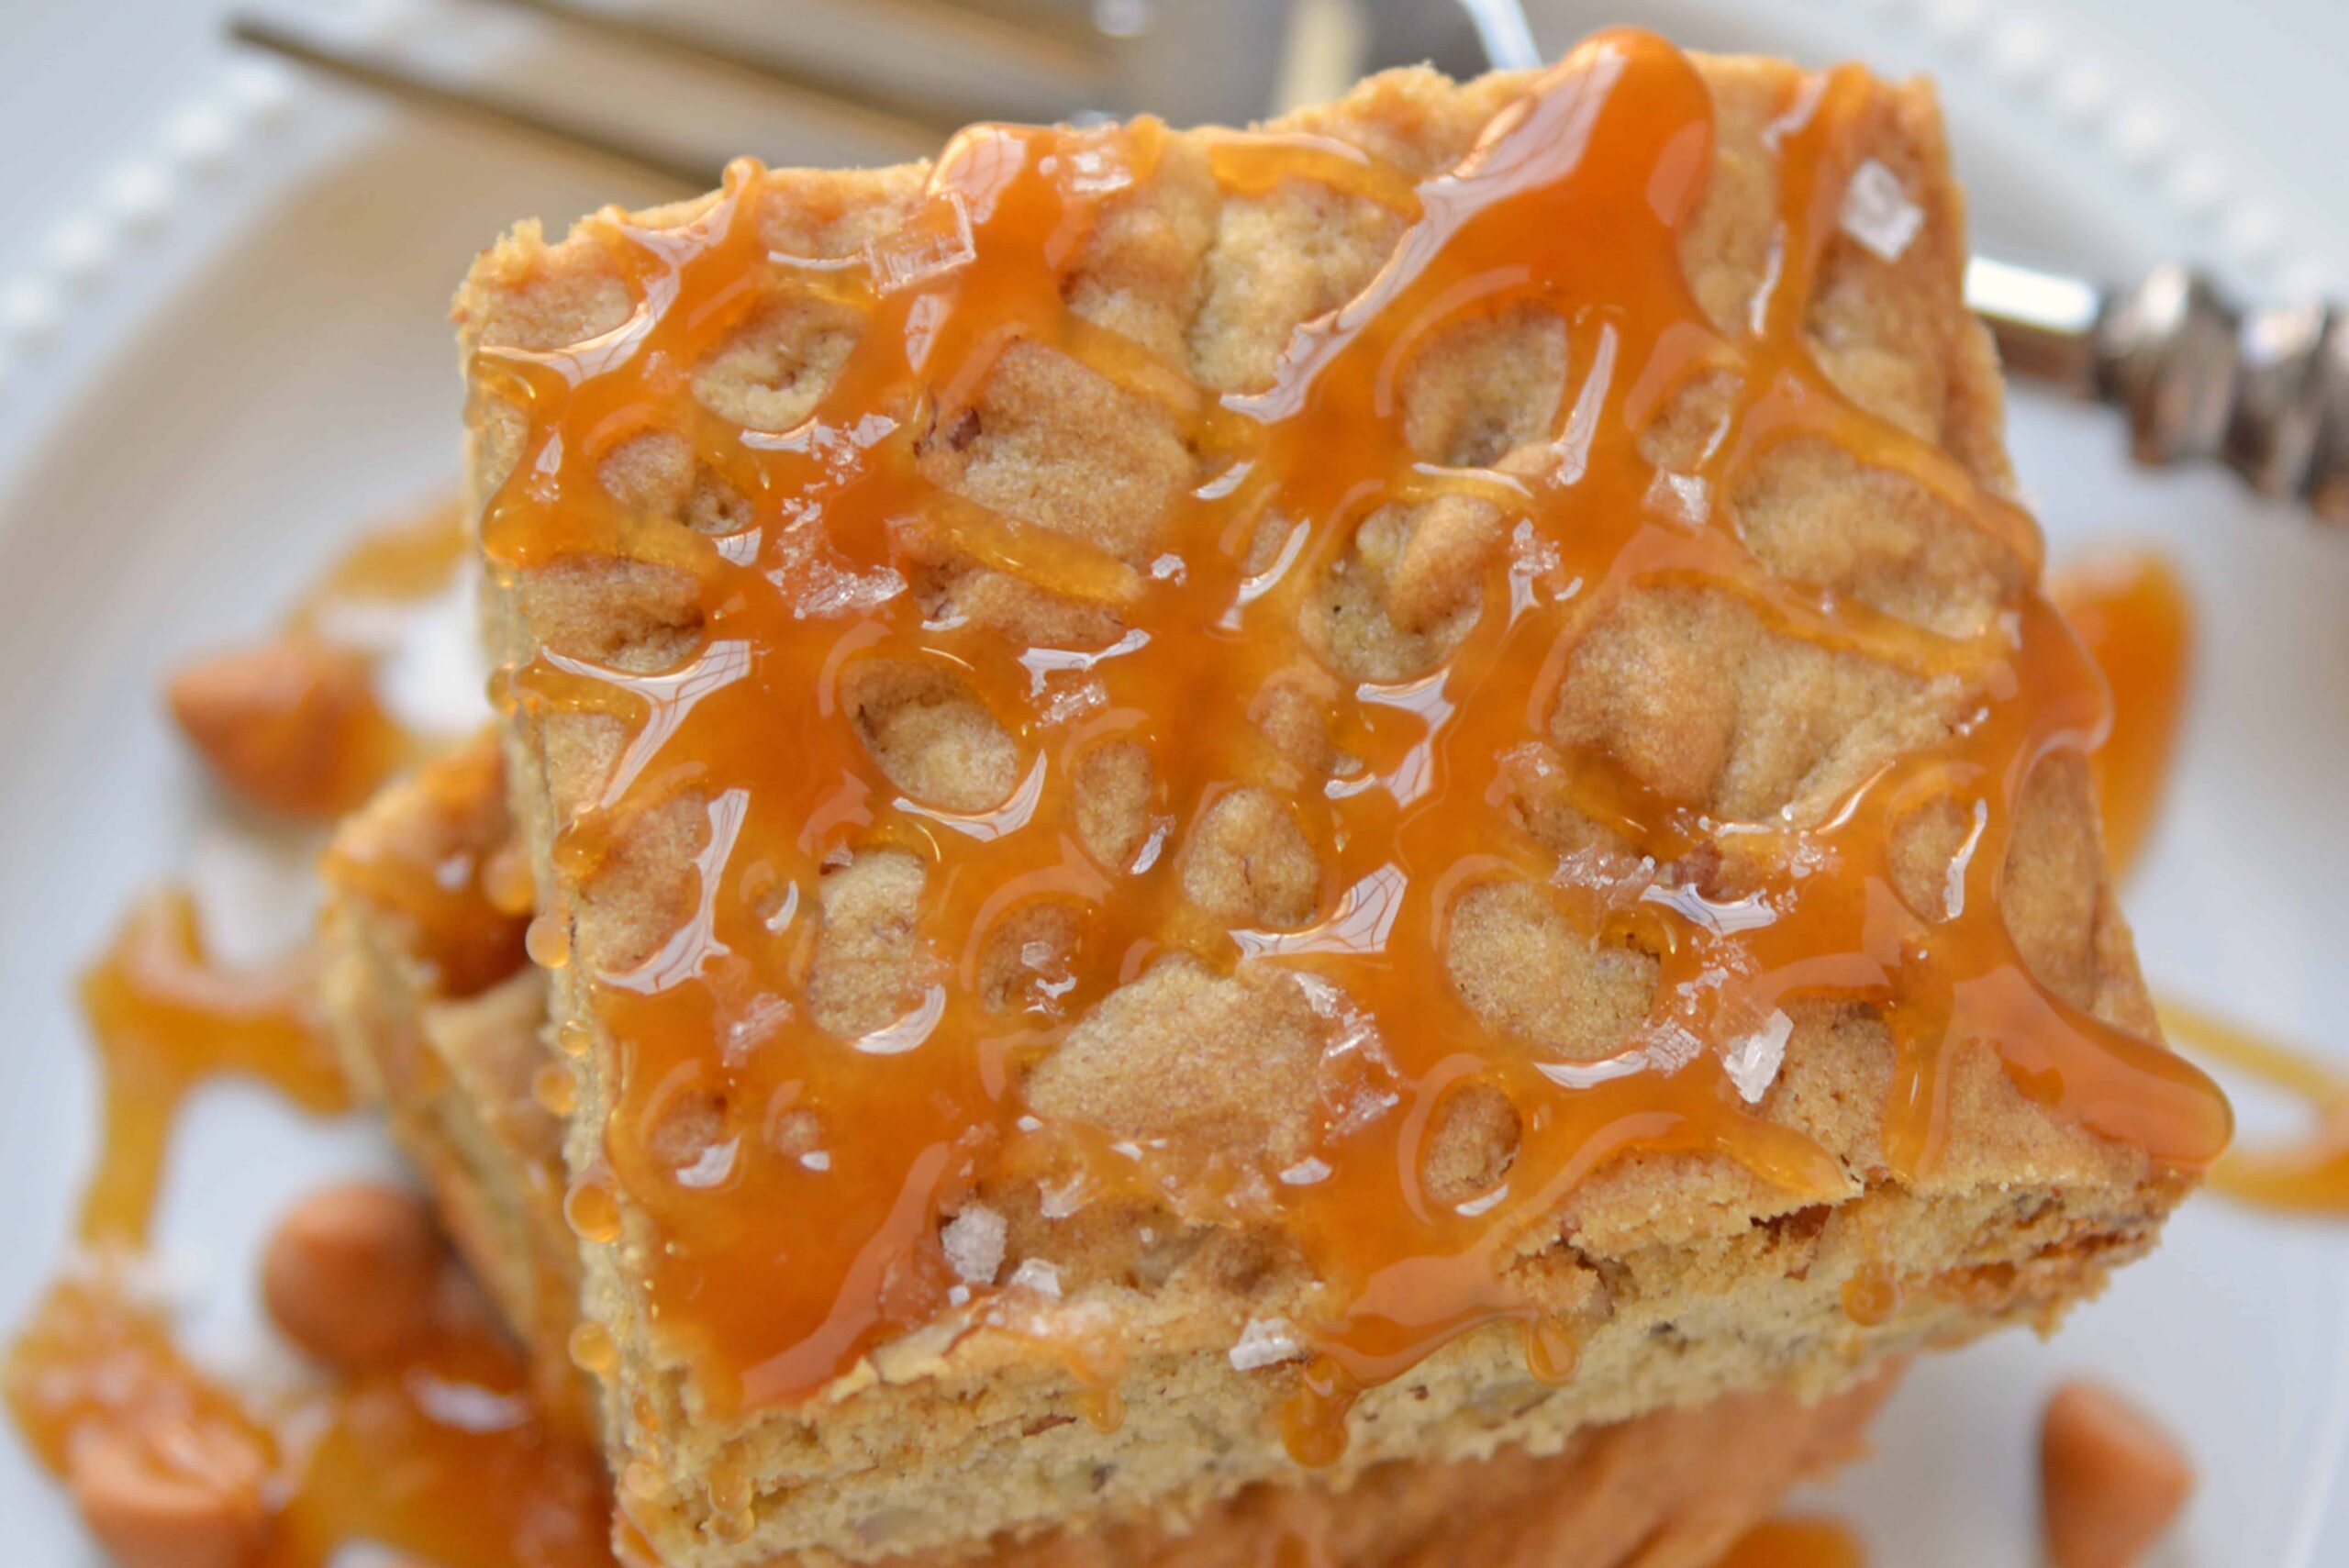 Soft Butterscotch Blondies are soft brown butter brownies loaded with butterscotch chips and drizzled with salted caramel sauce. #brownbutterbrownies #butterscotchbrownies www.savoryexperiments.com